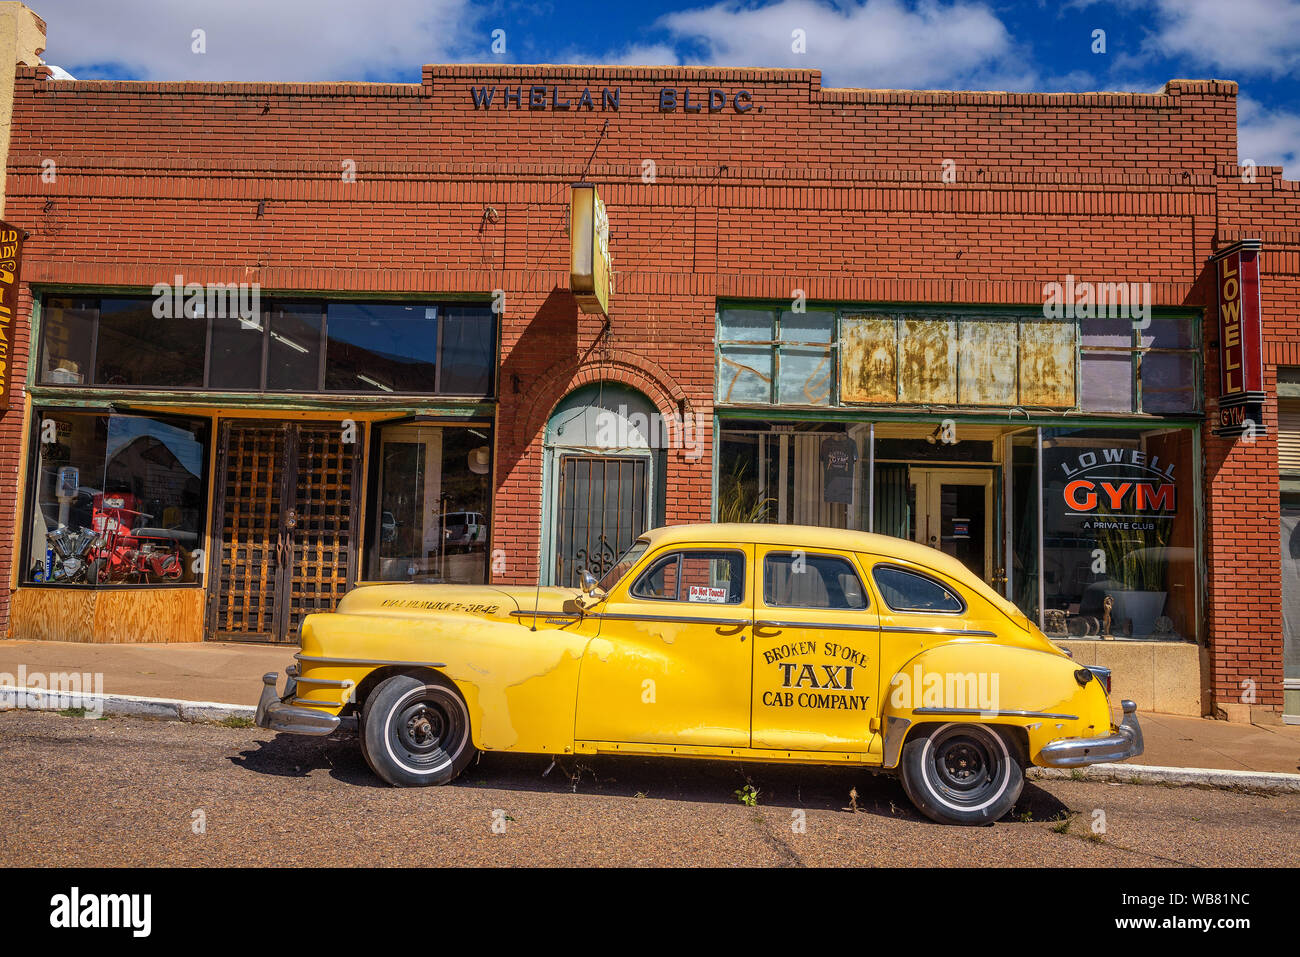 Vintage Chrysler car at the Erie street in Lowell, now part of Bisbee, Arizona Stock Photo